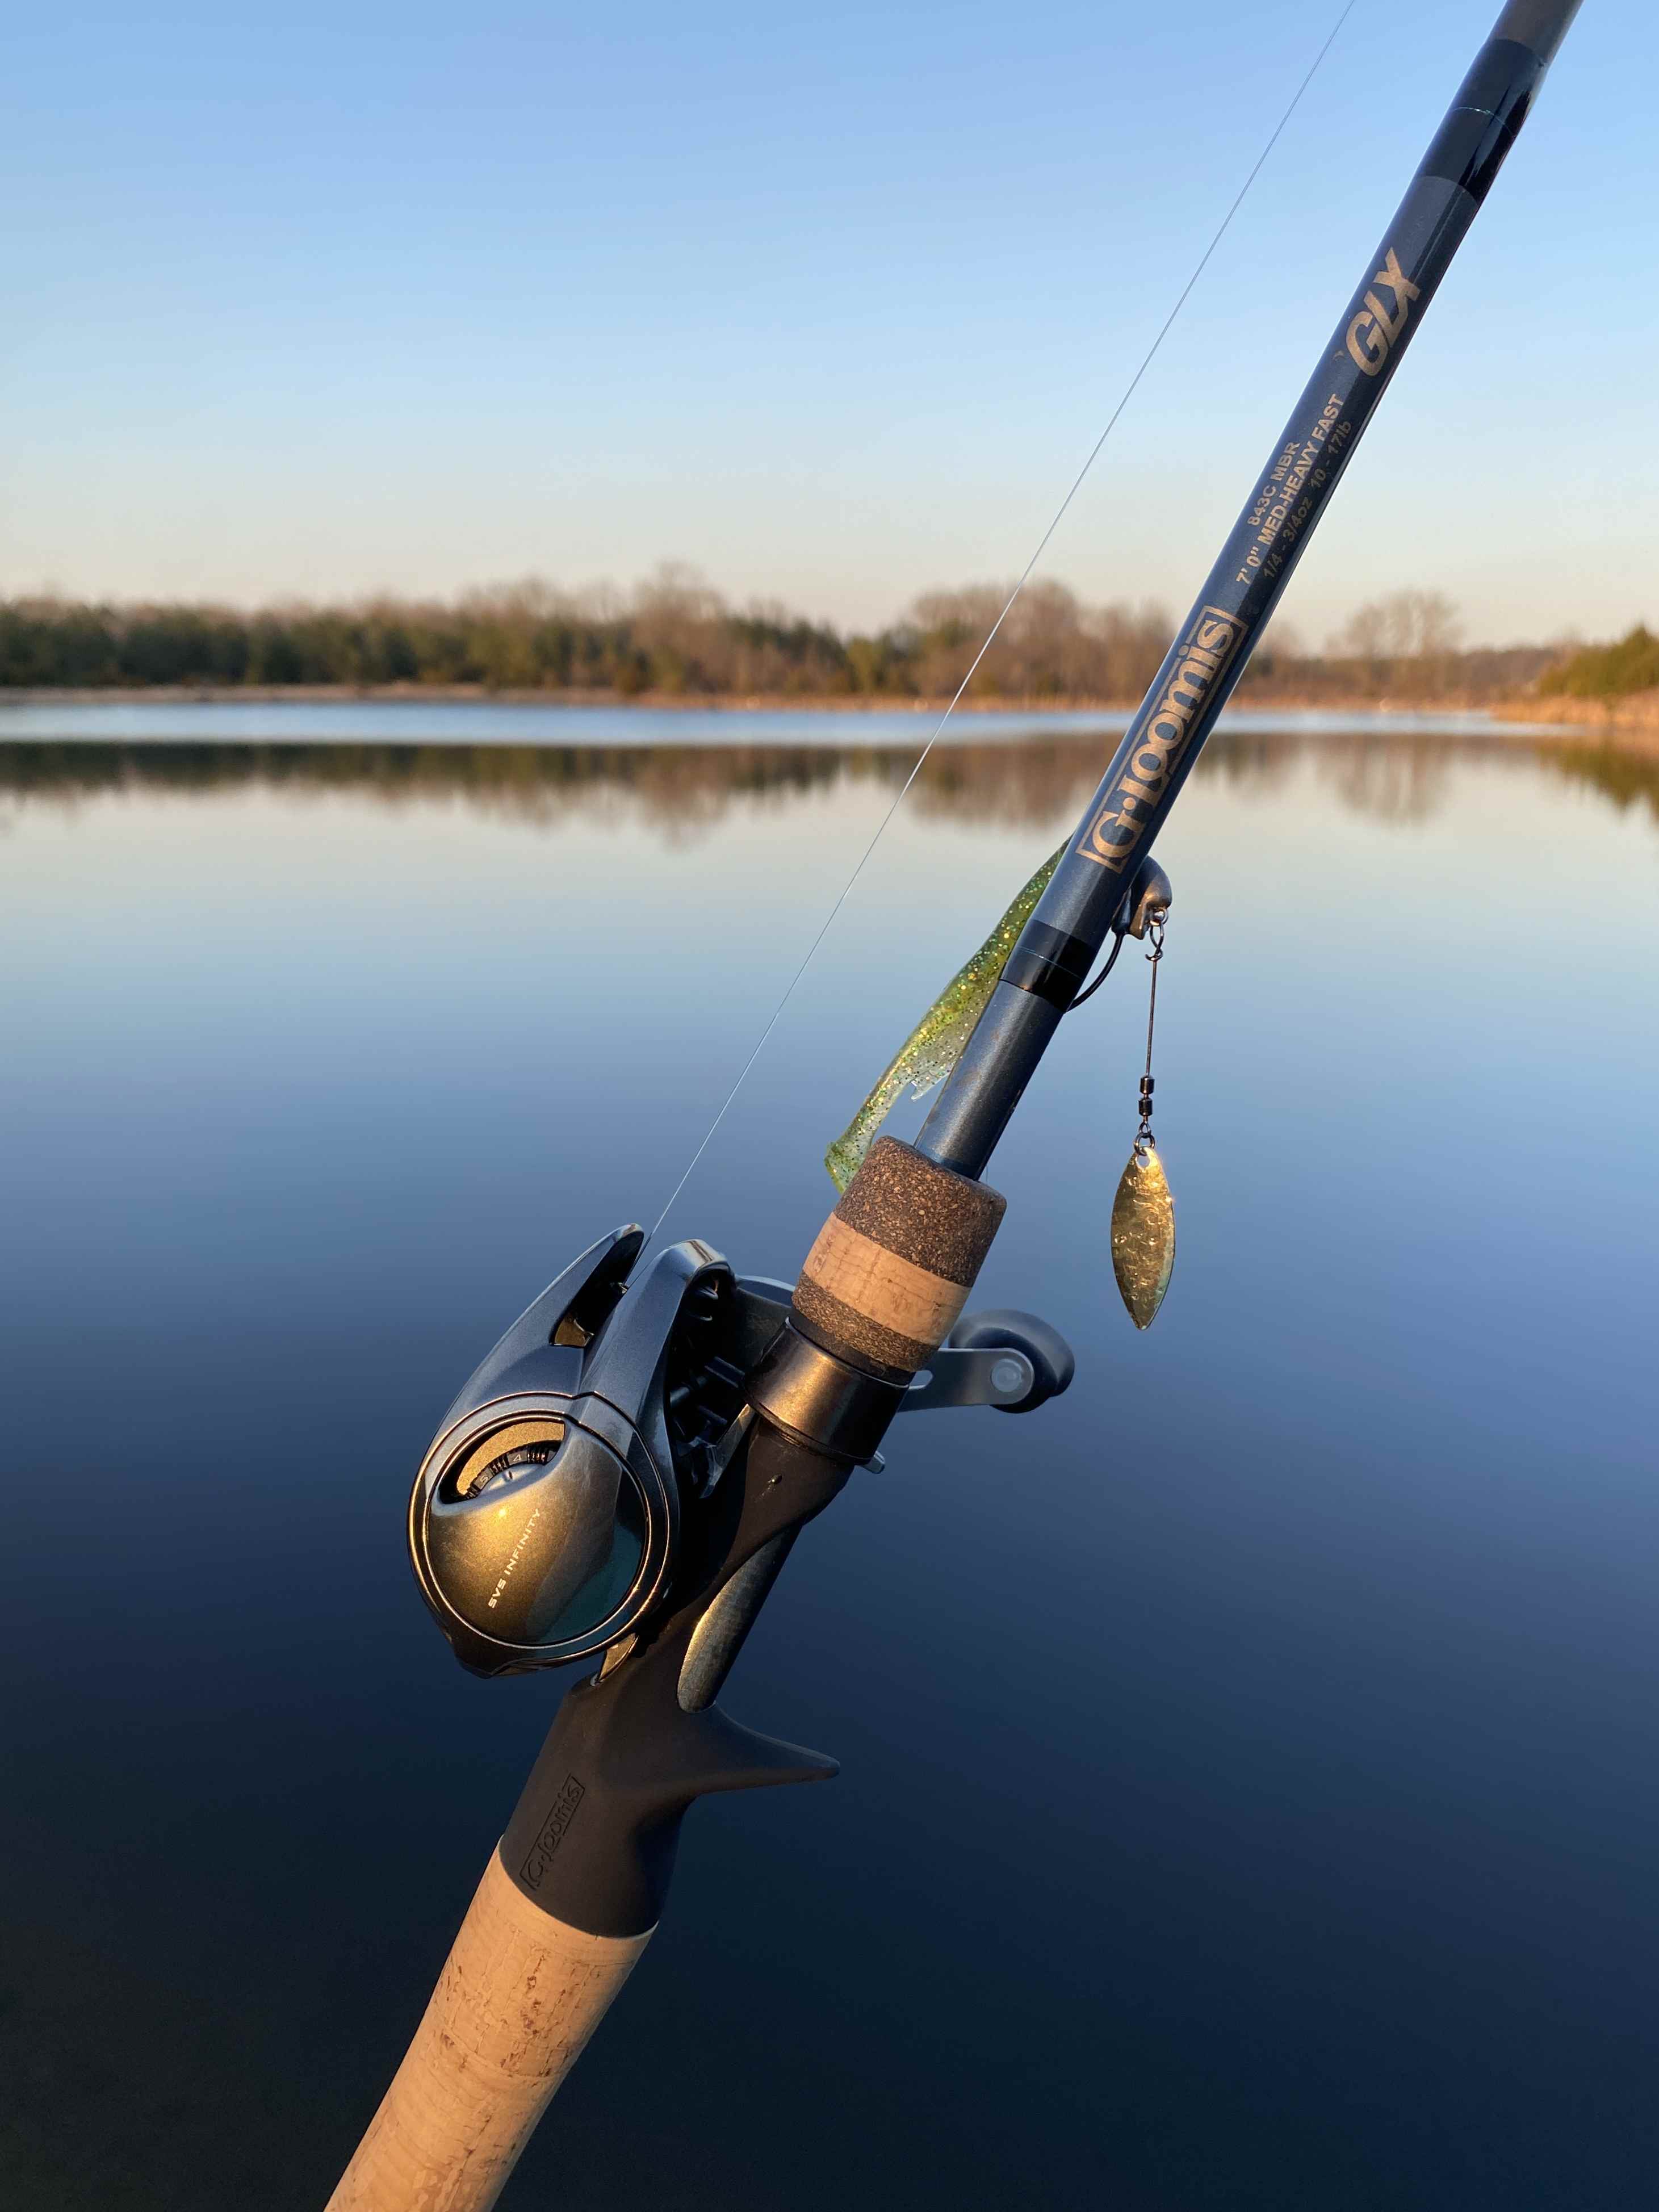 G Loomis GLX 843c MBR in-depth review - Fishing Rods, Reels, Line